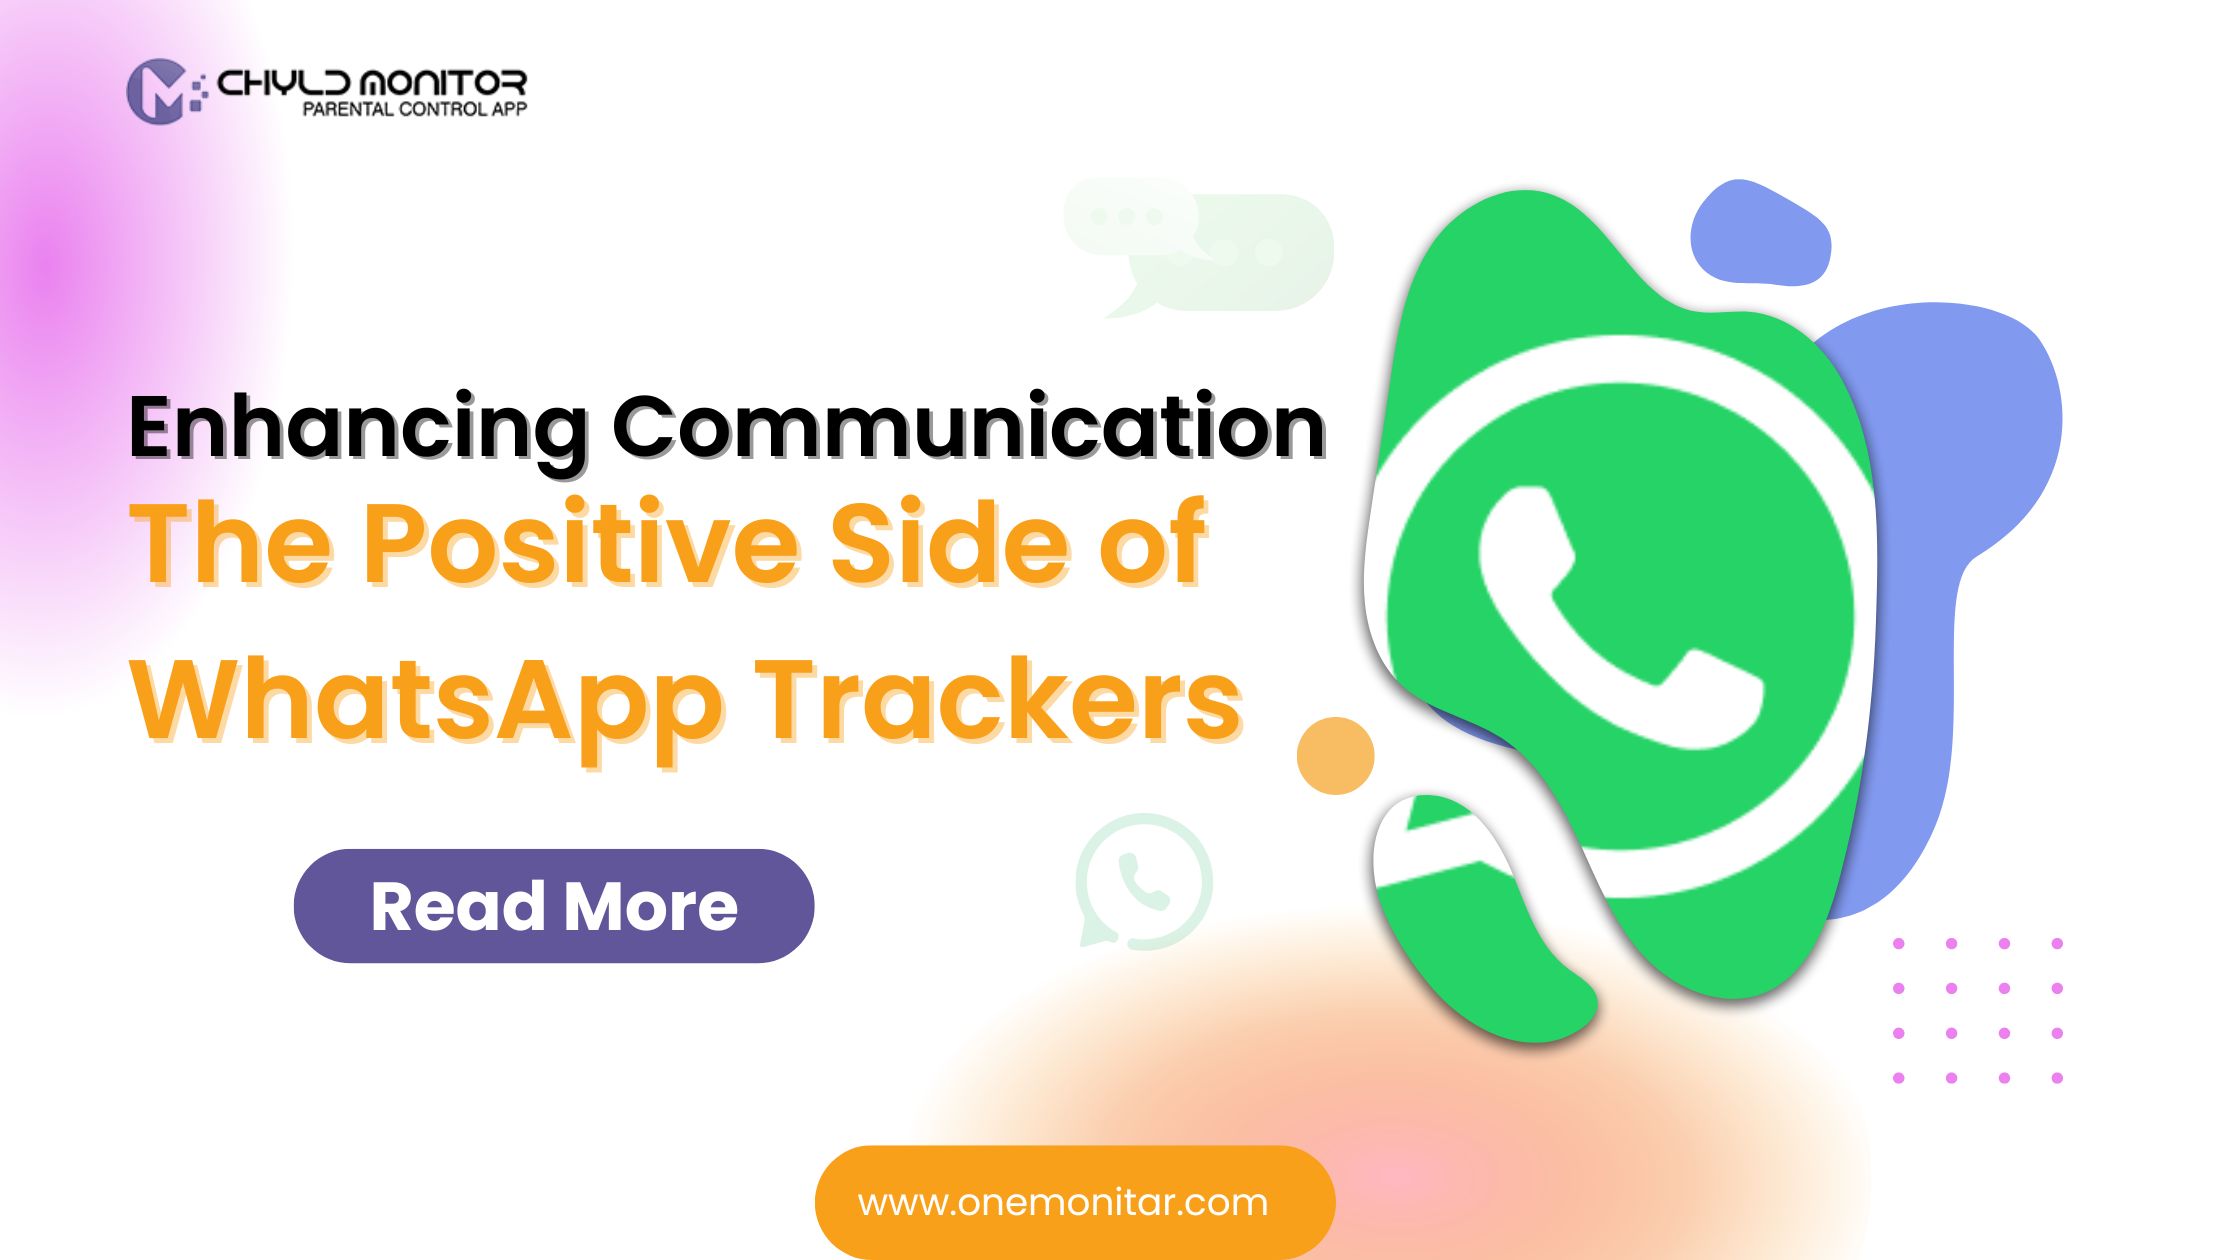 Enhancing Communication The Positive Side of WhatsApp Trackers